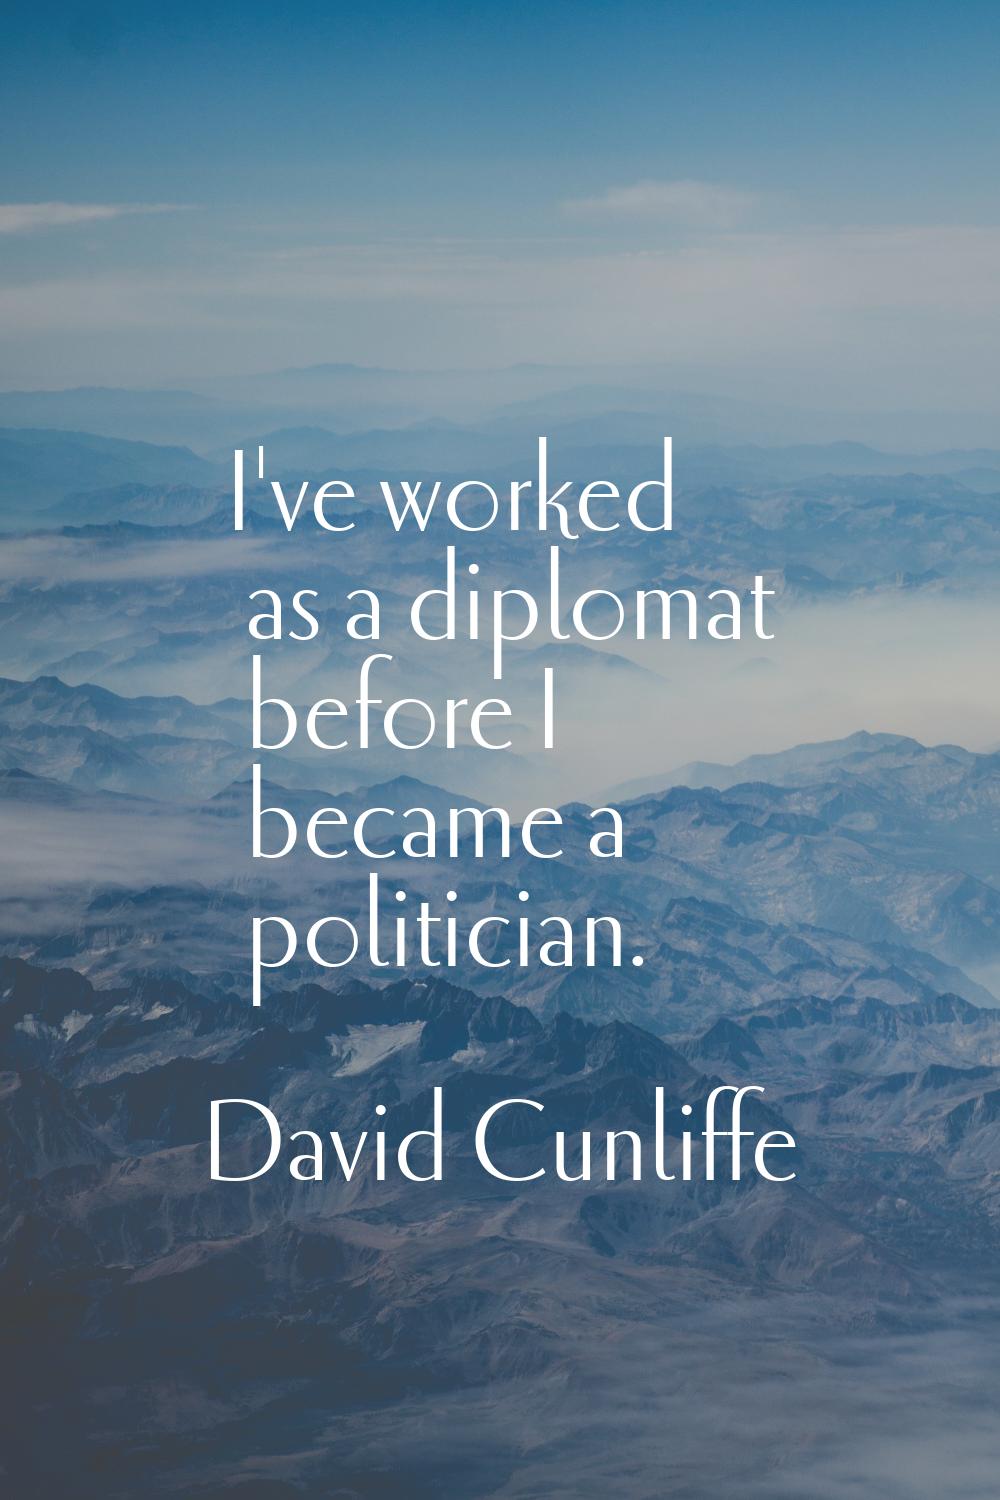 I've worked as a diplomat before I became a politician.